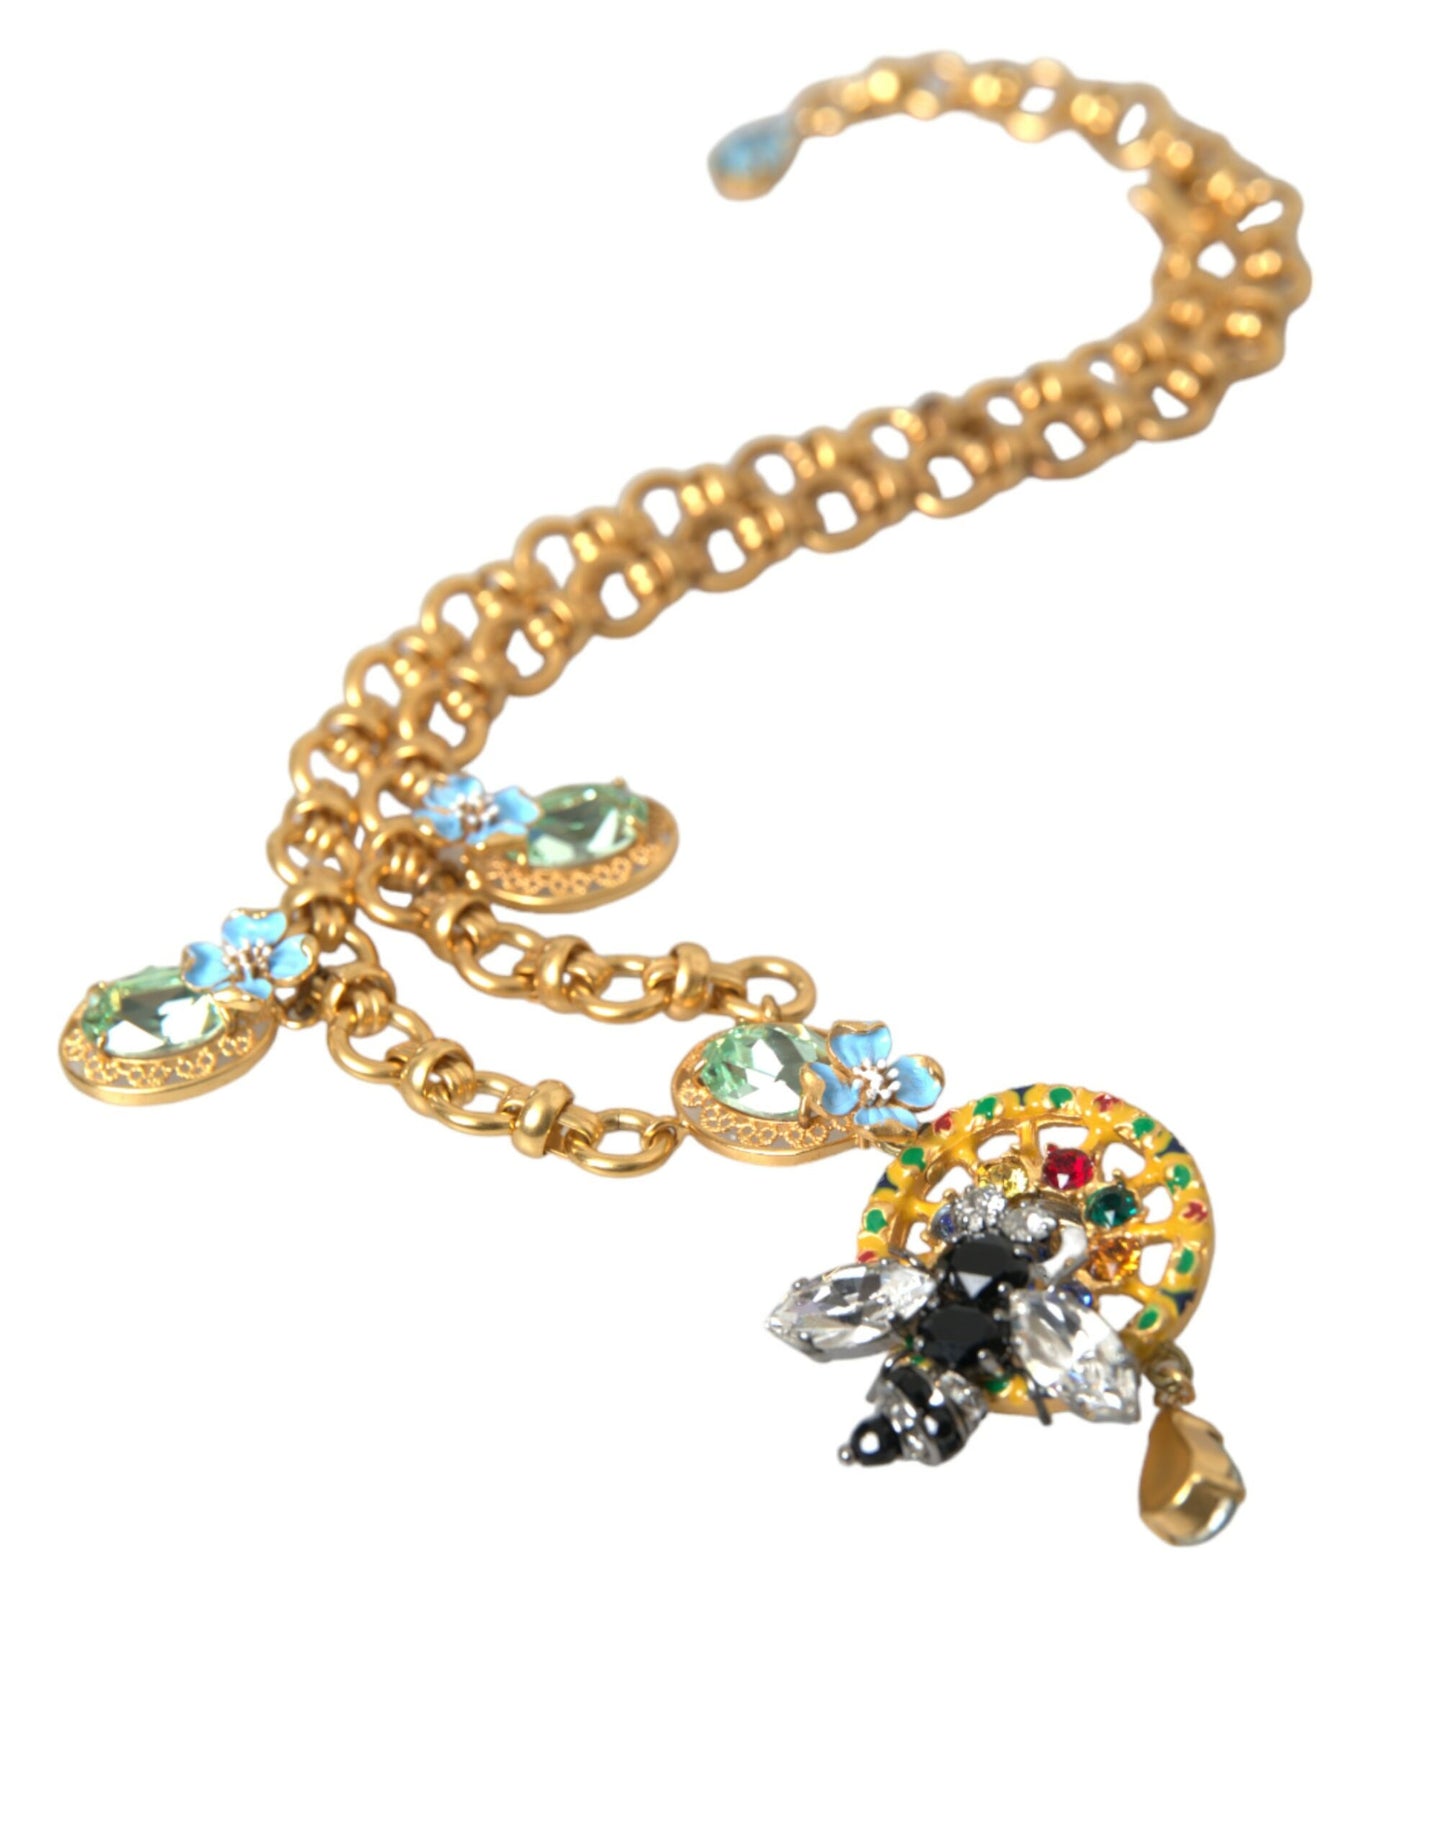 Dolce & Gabbana Gold Brass Chain Crystal Bee Pendant Charm Necklace